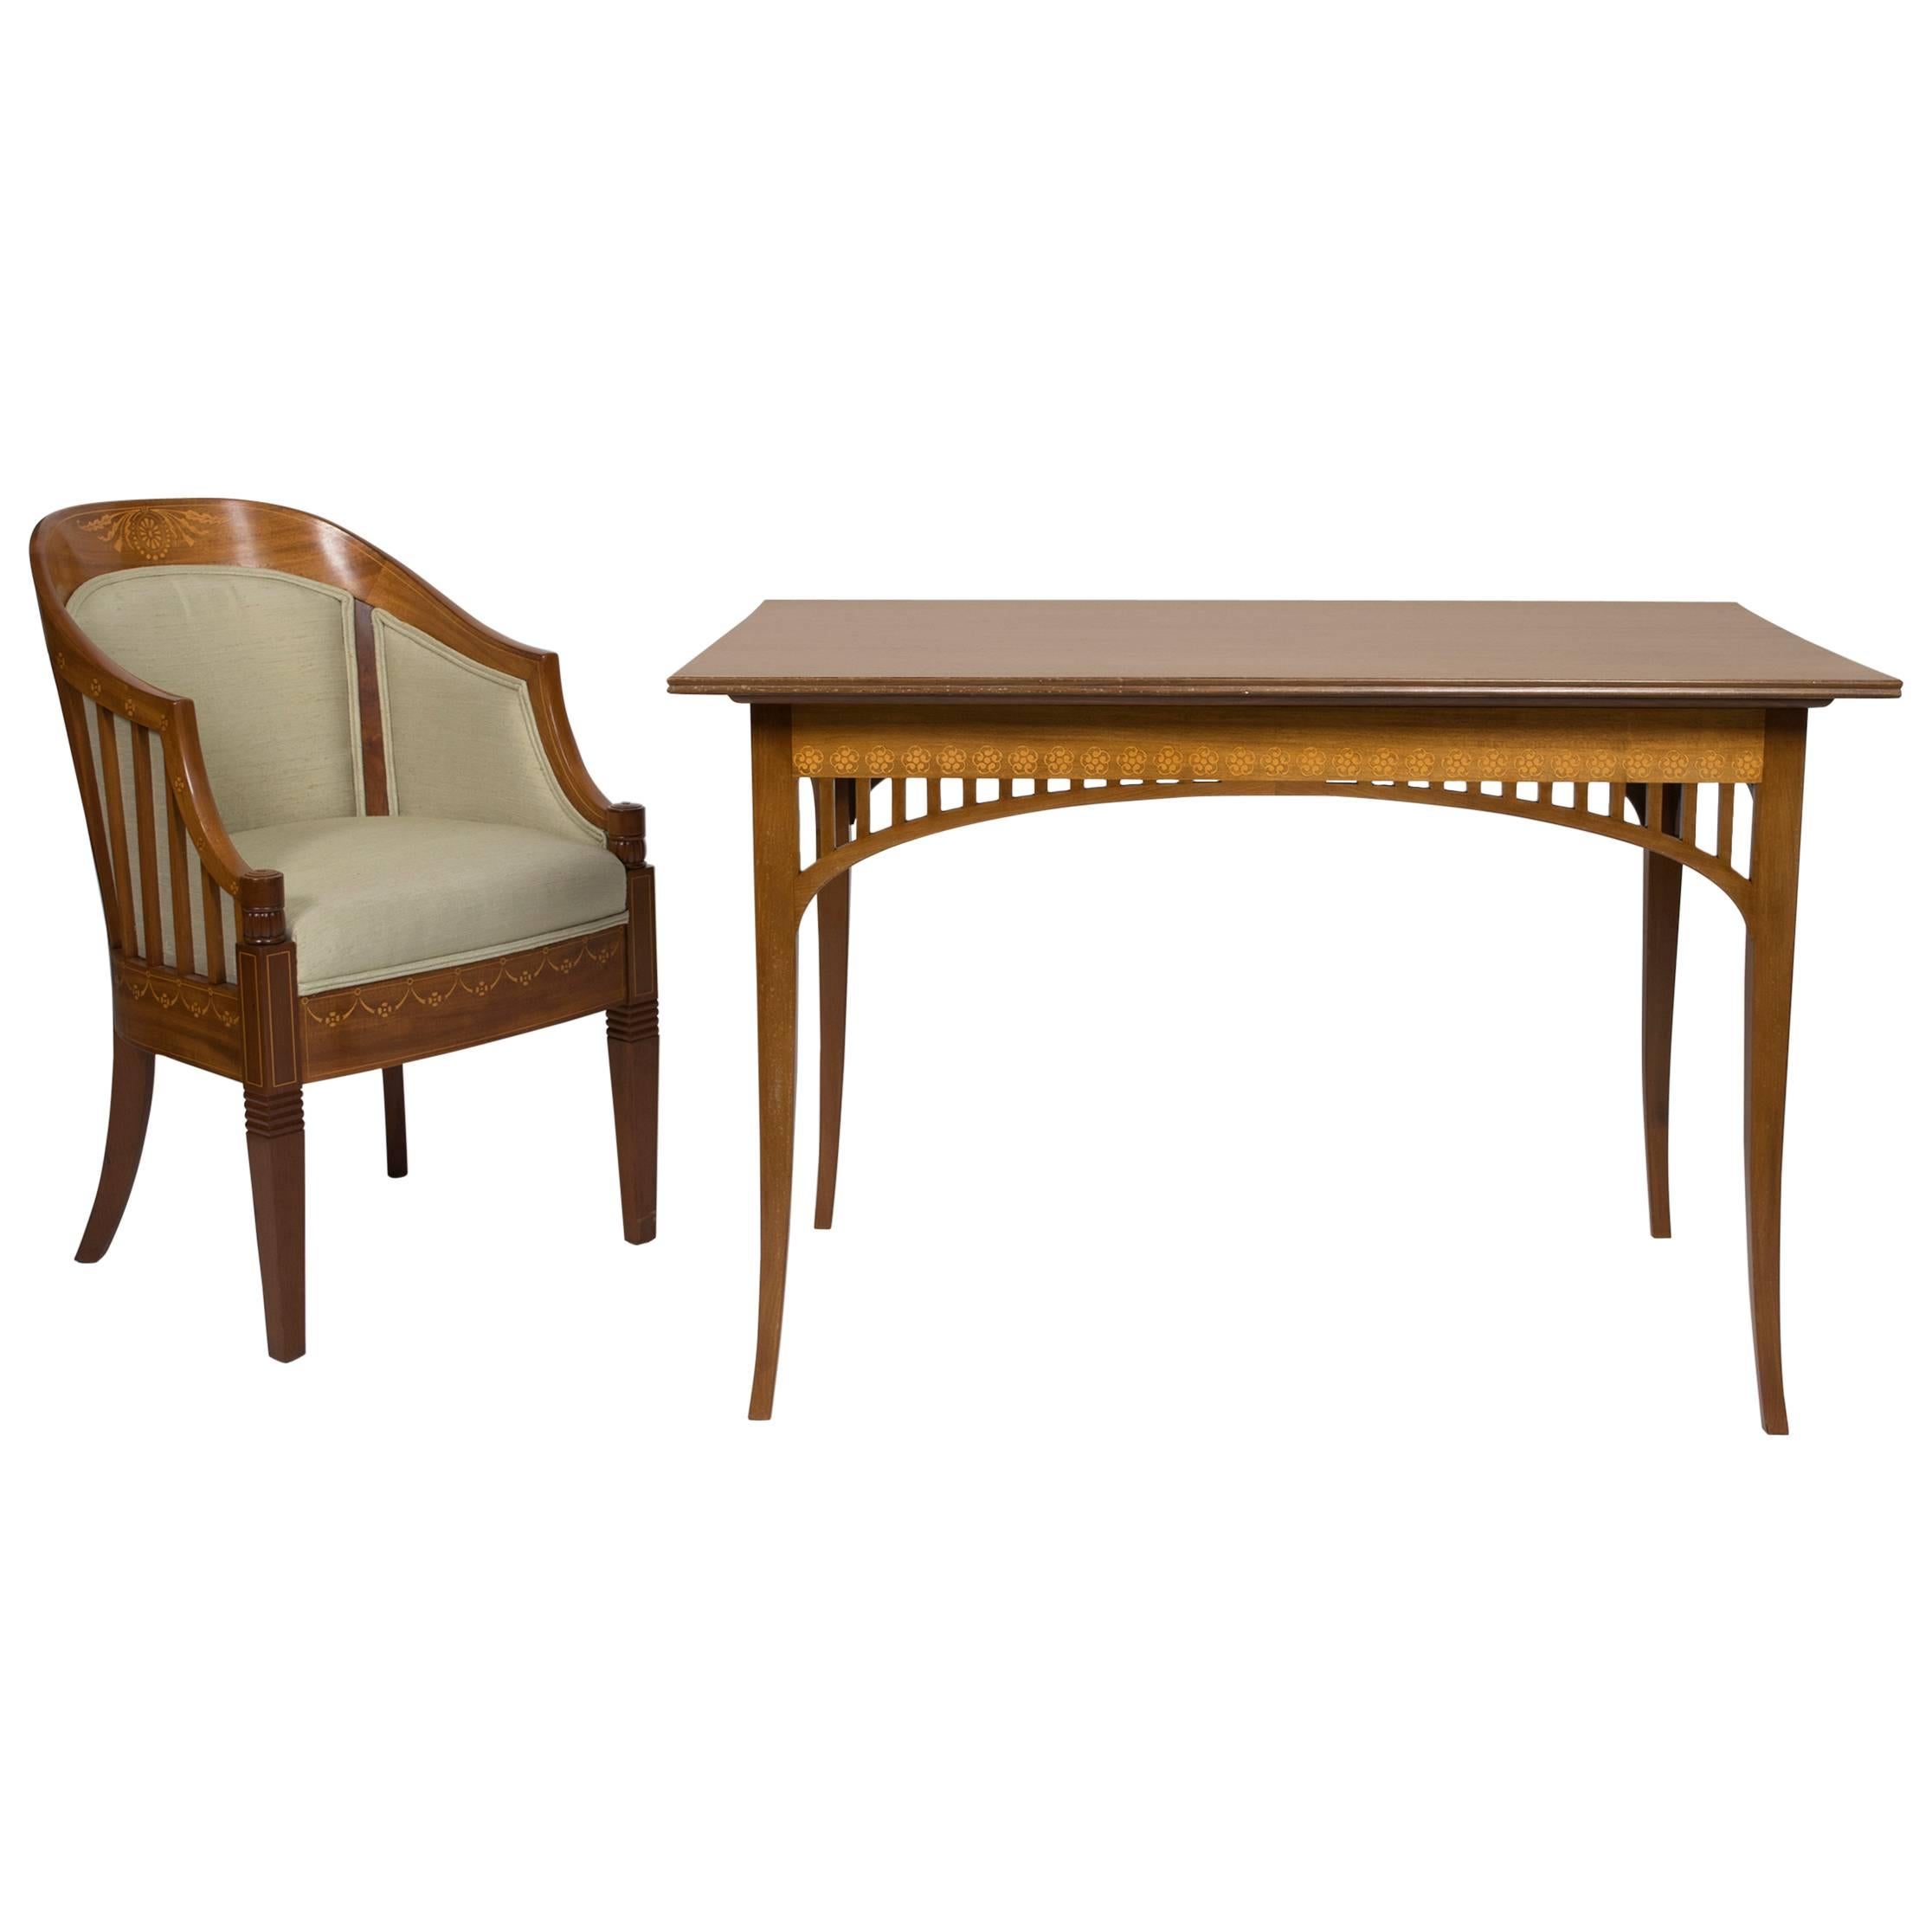 Swedish Art Nouveau Mahogany Table En Suite with Four Chairs, circa 1900 For Sale